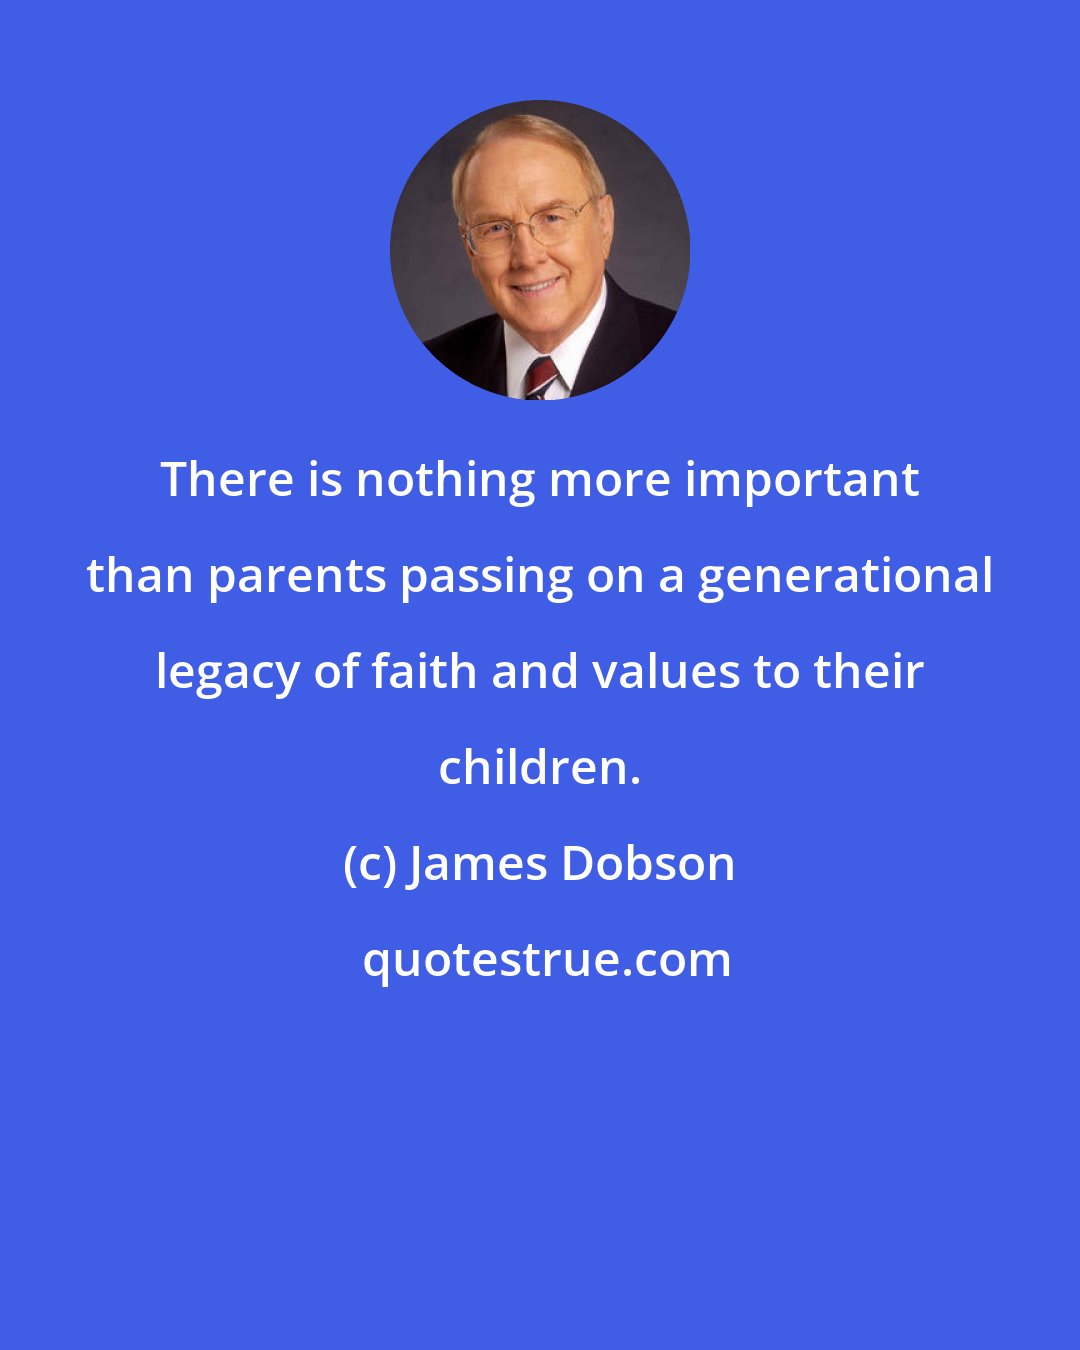 James Dobson: There is nothing more important than parents passing on a generational legacy of faith and values to their children.